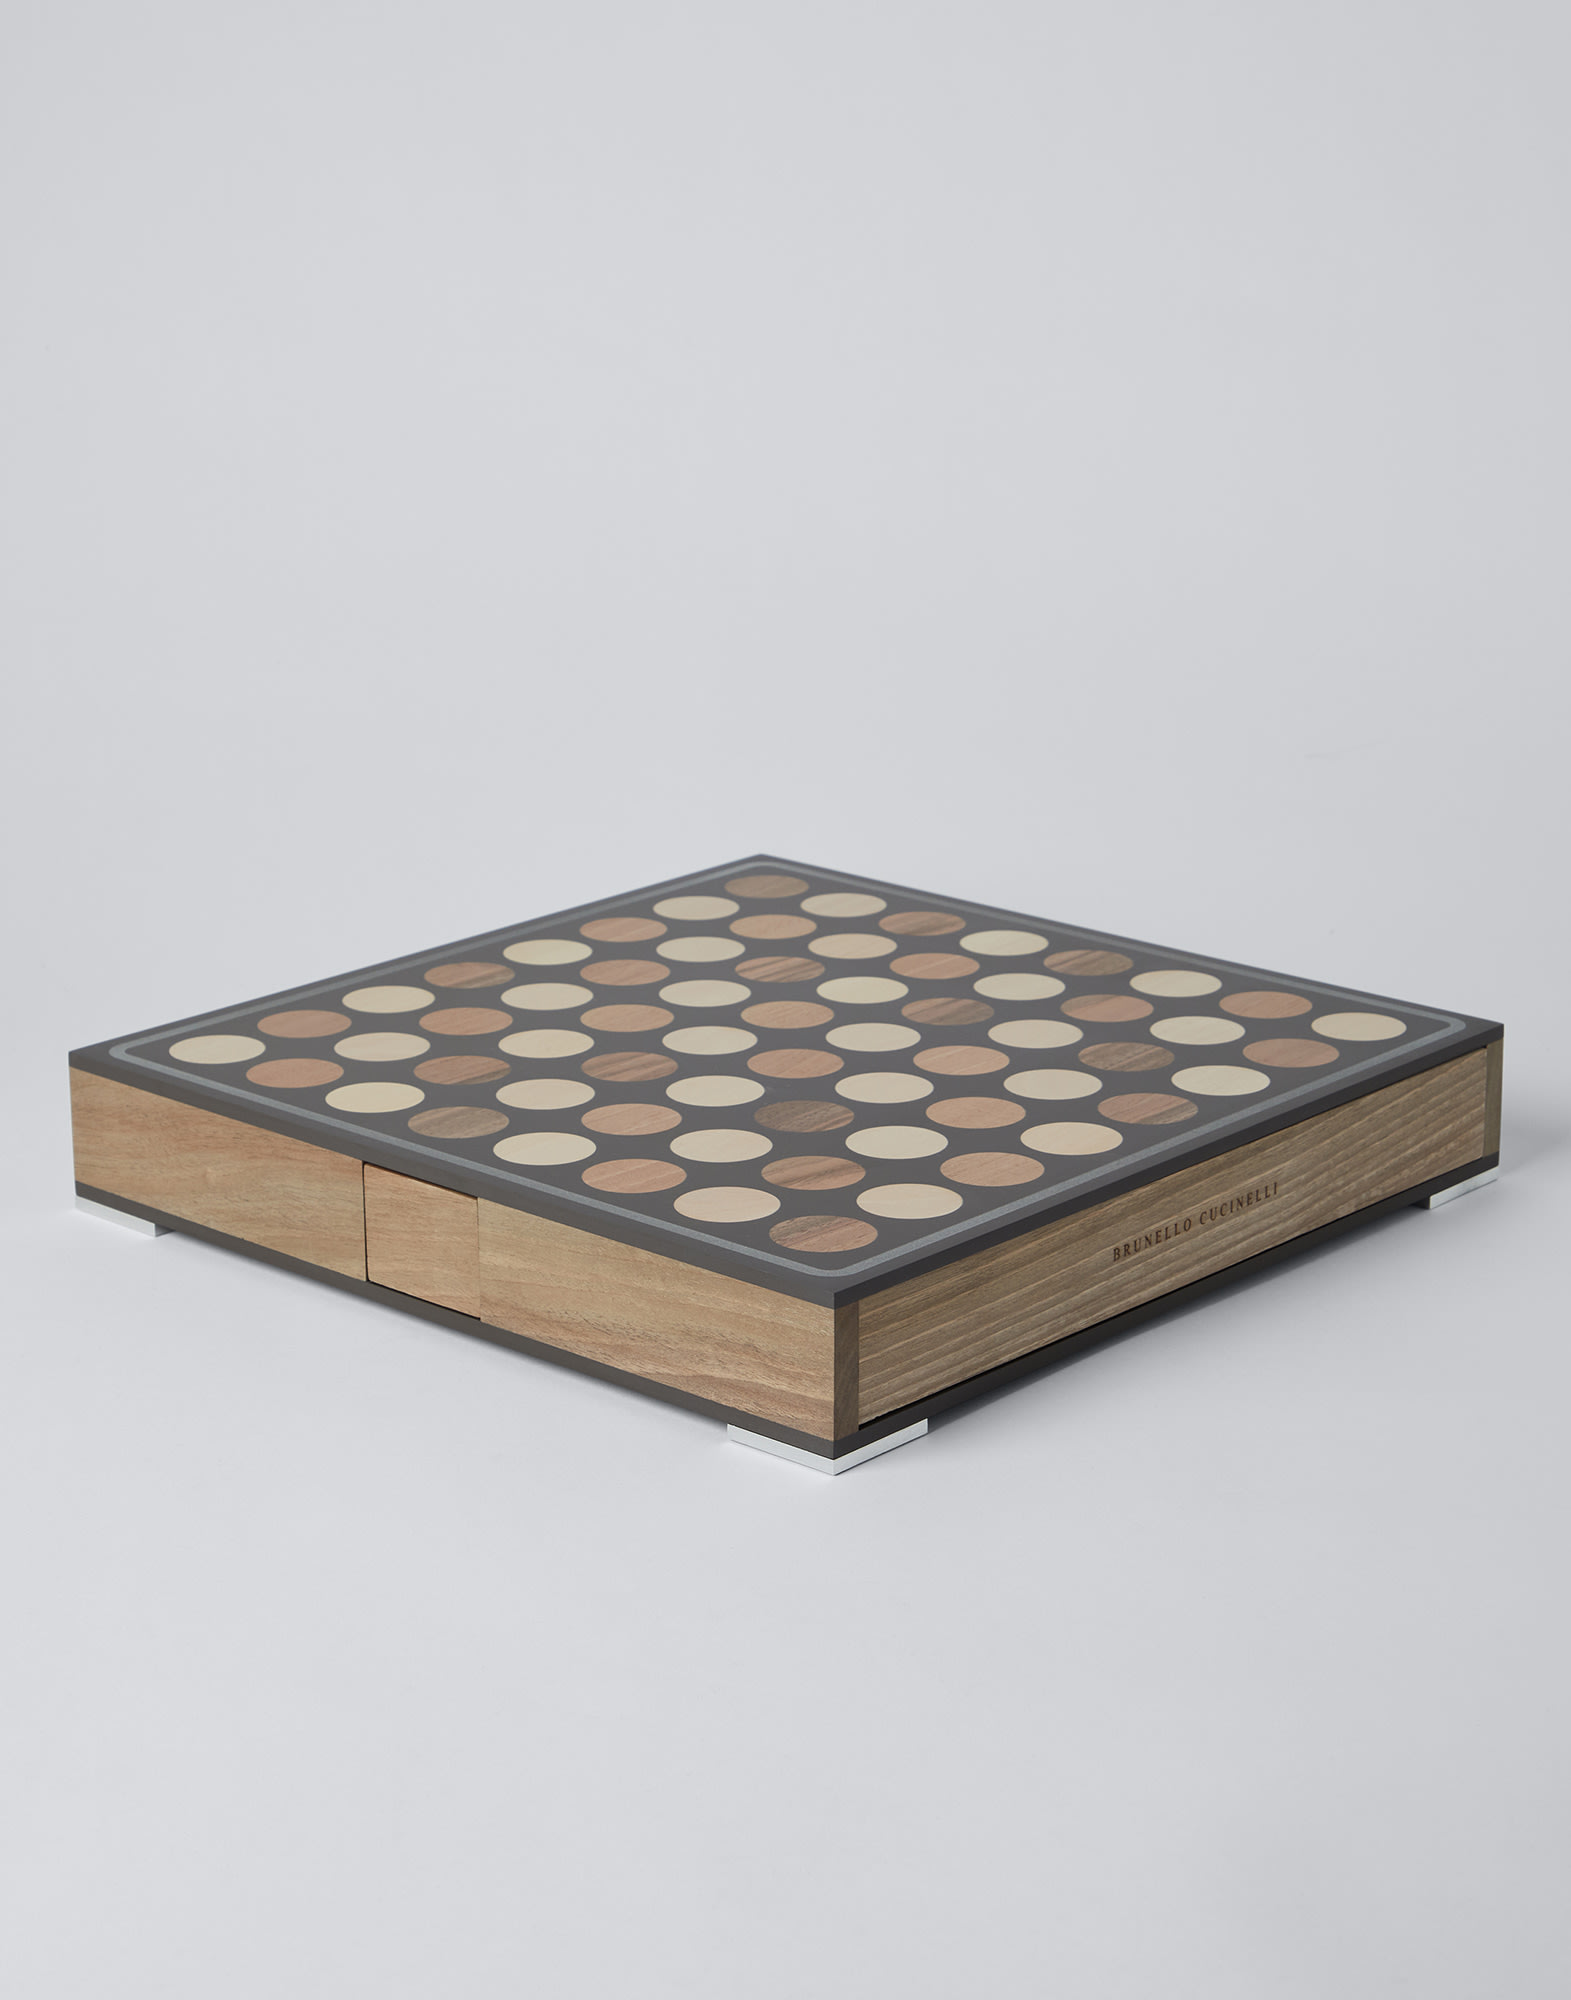 Chess and draughts set